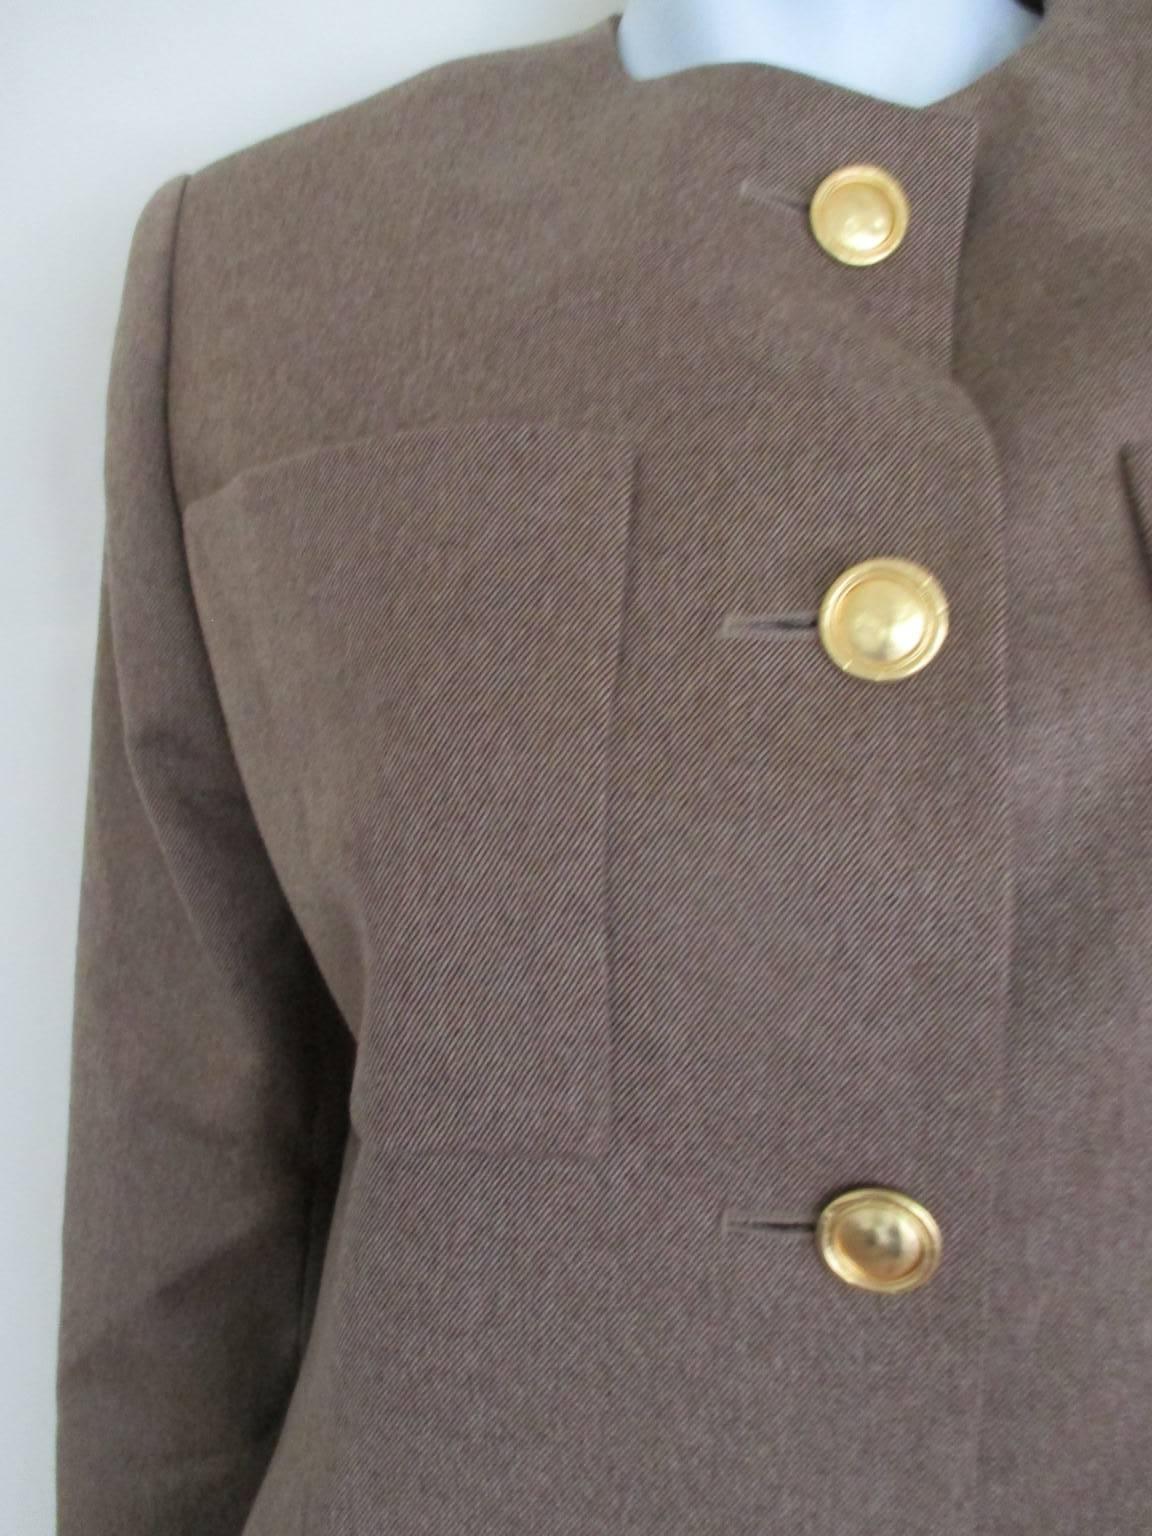 Vintage Christian Dior Boutique jacket with 4 gold color button
no pockets
Size is small aprox. EU38 / US 8
Please note that vintage items are not new and therefore might have minor imperfections. 
